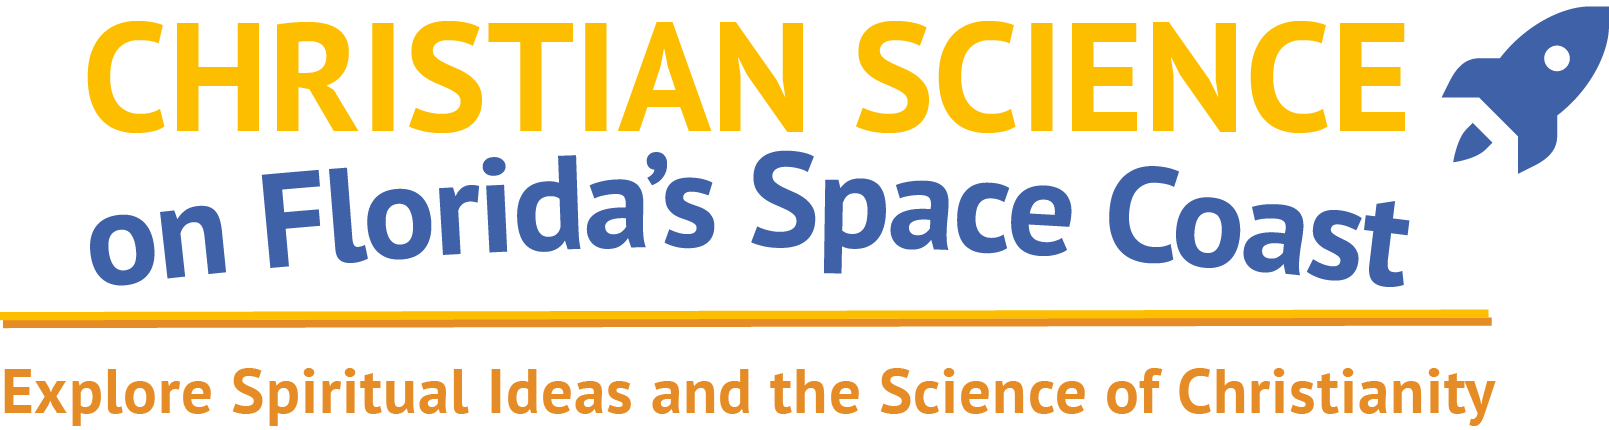 Christian Science on Florida's Space Coast — Explore Spiritual Ideas and the Science of Christianity